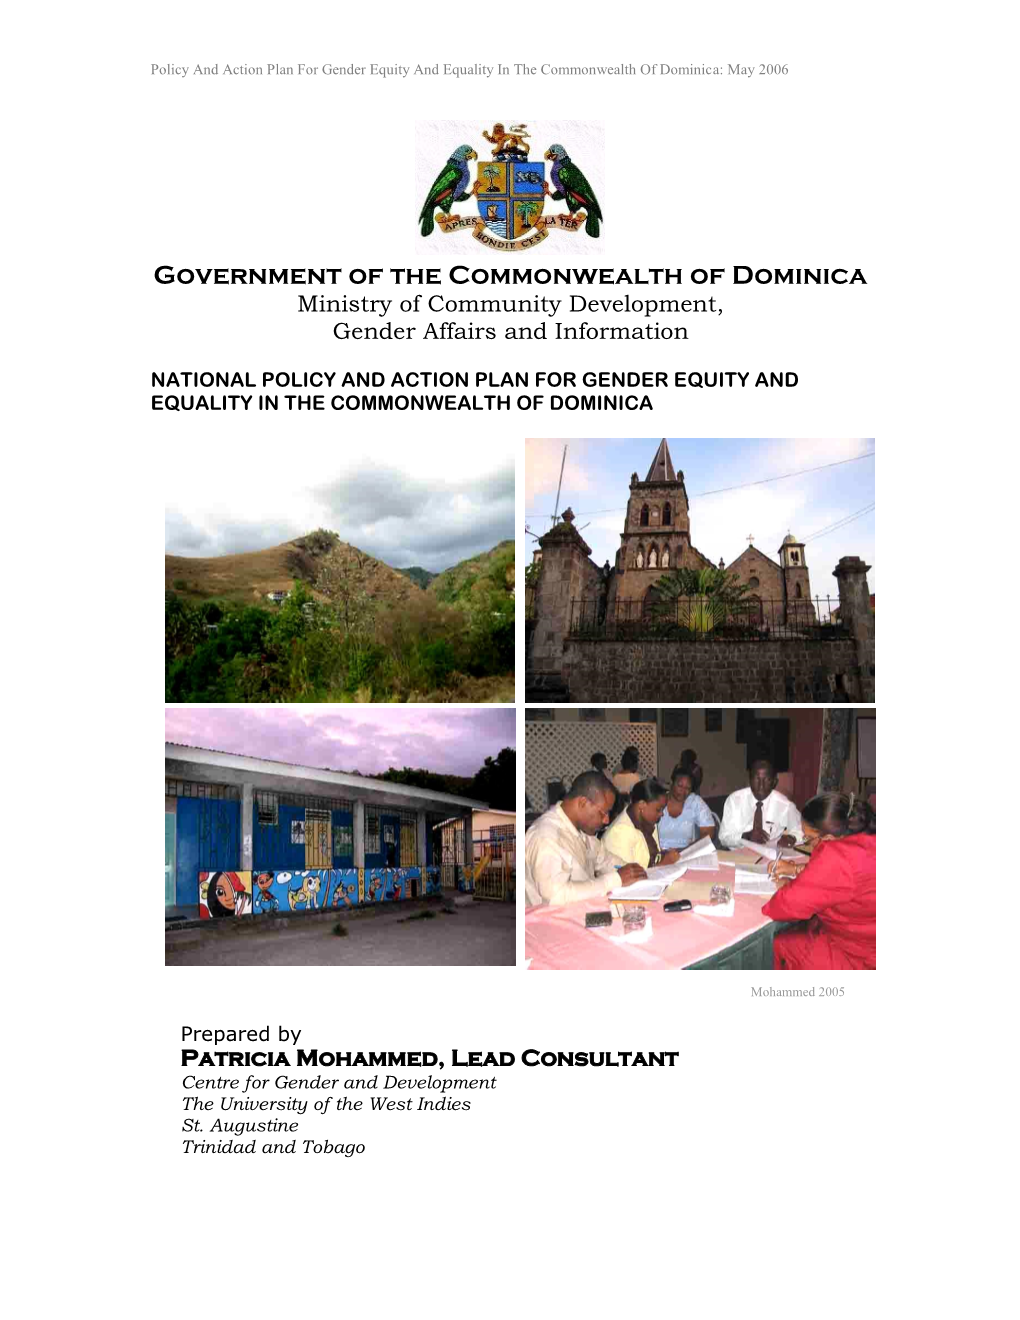 Government of the Commonwealth of Dominica Ministry of Community Development, Gender Affairs and Information